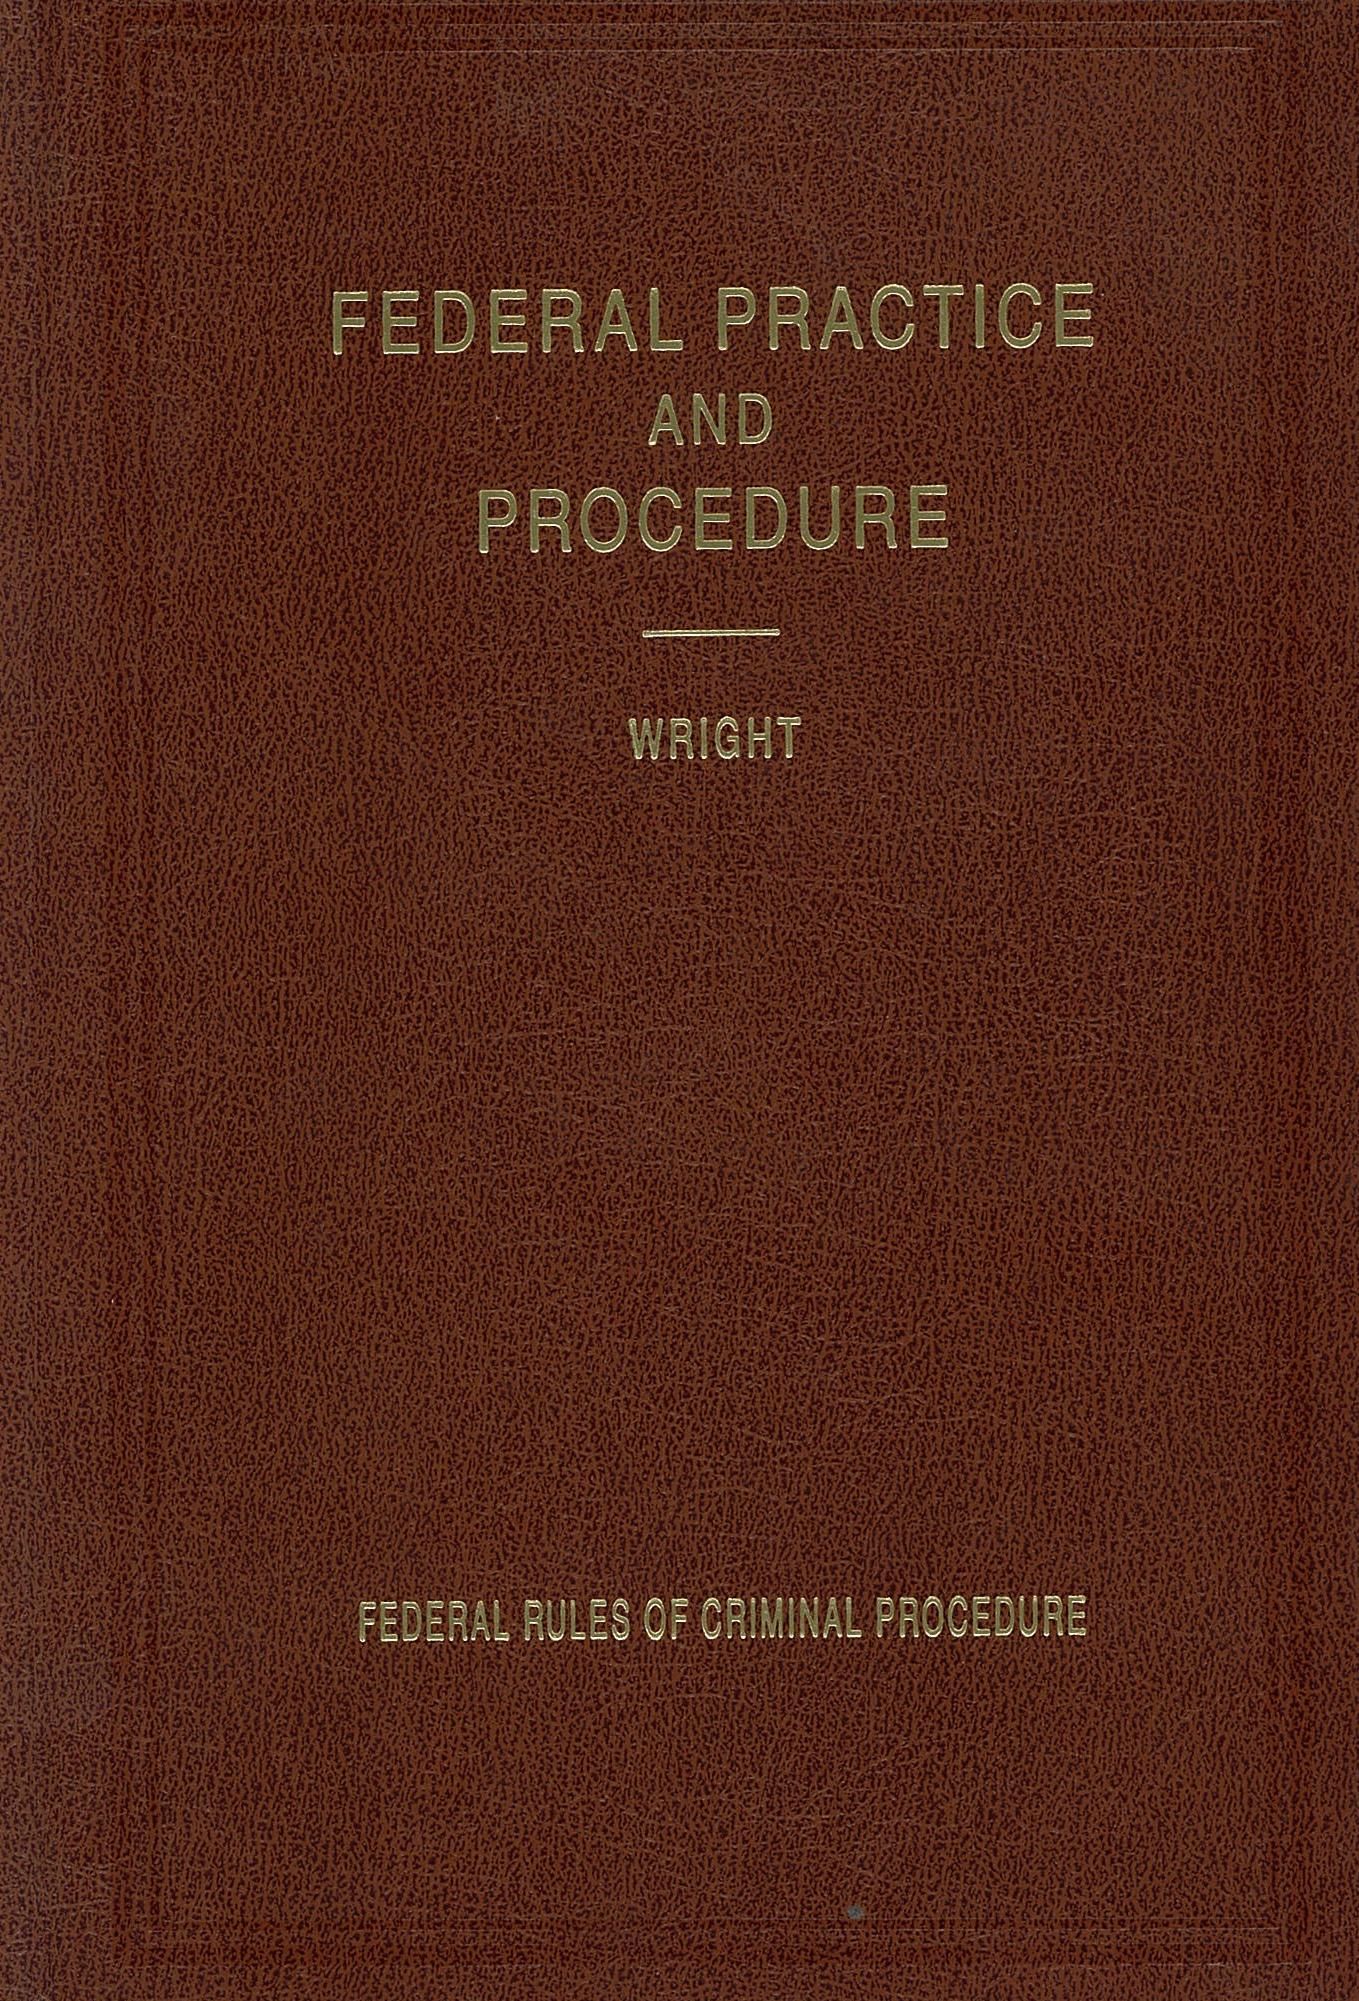 Federal Practice and  procedure. Federal rules of criminal procedure